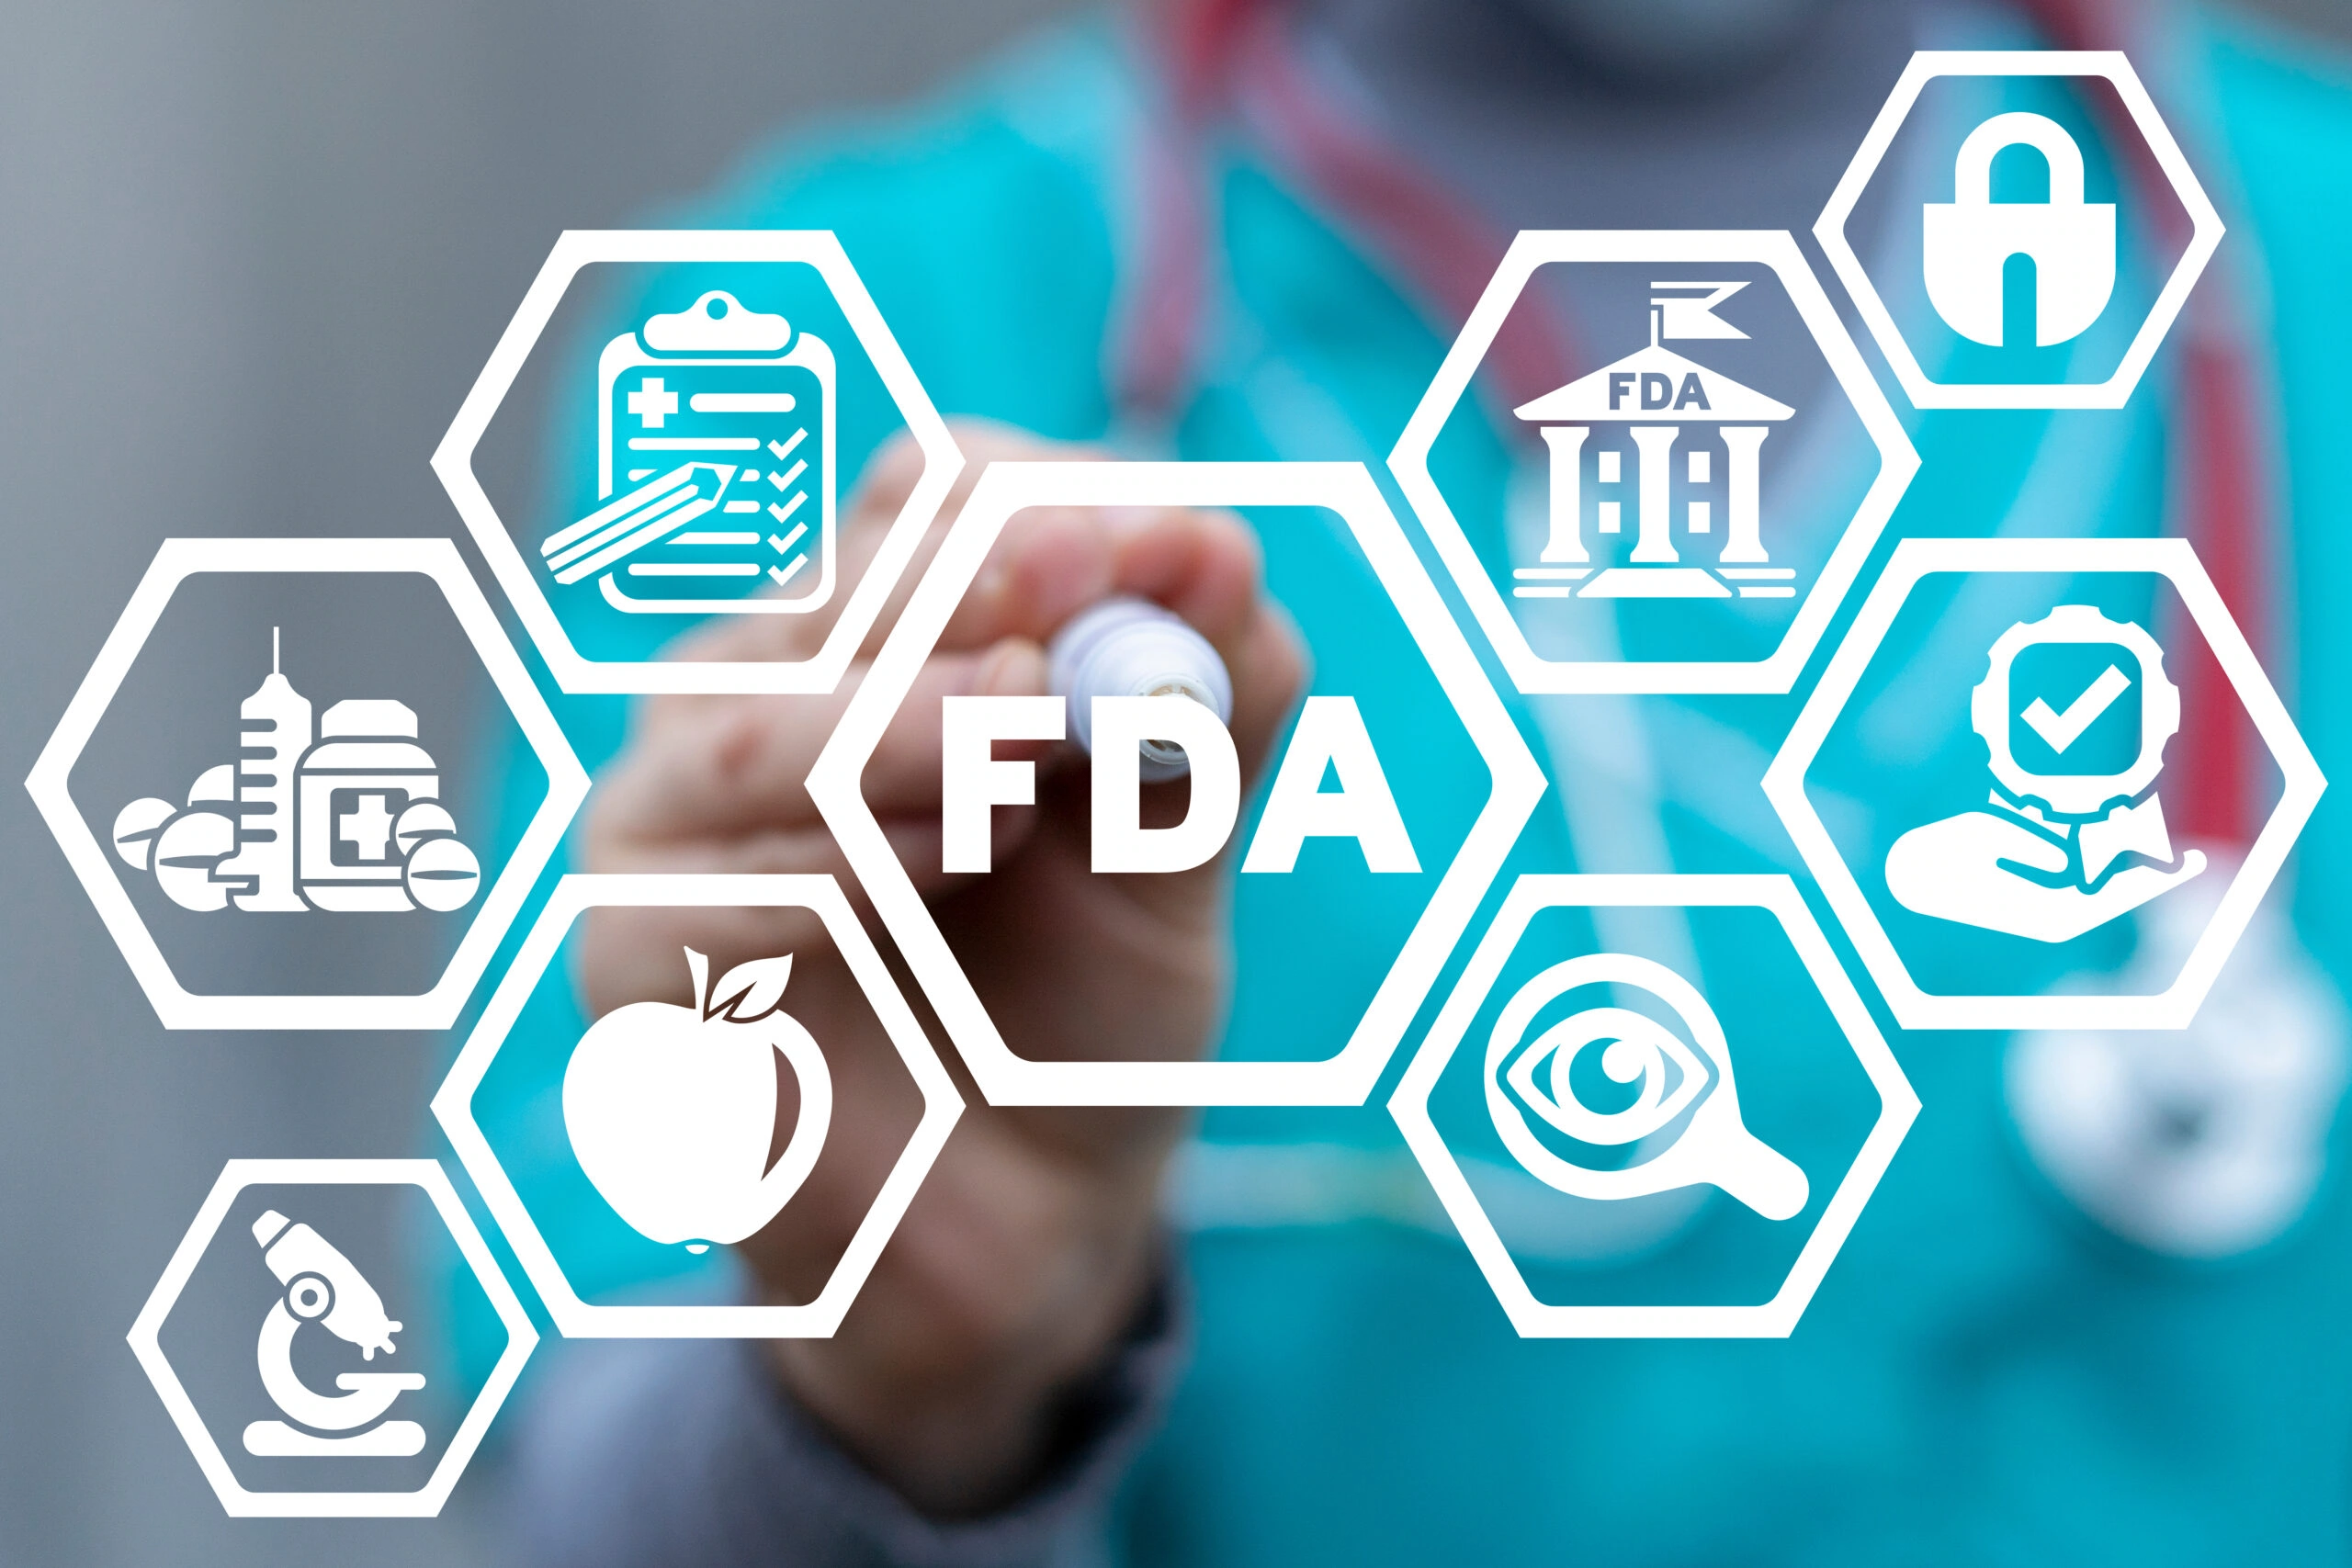 Steps the FDA Continues to Take to Strengthen the Premarket Notification [510(k)] Program